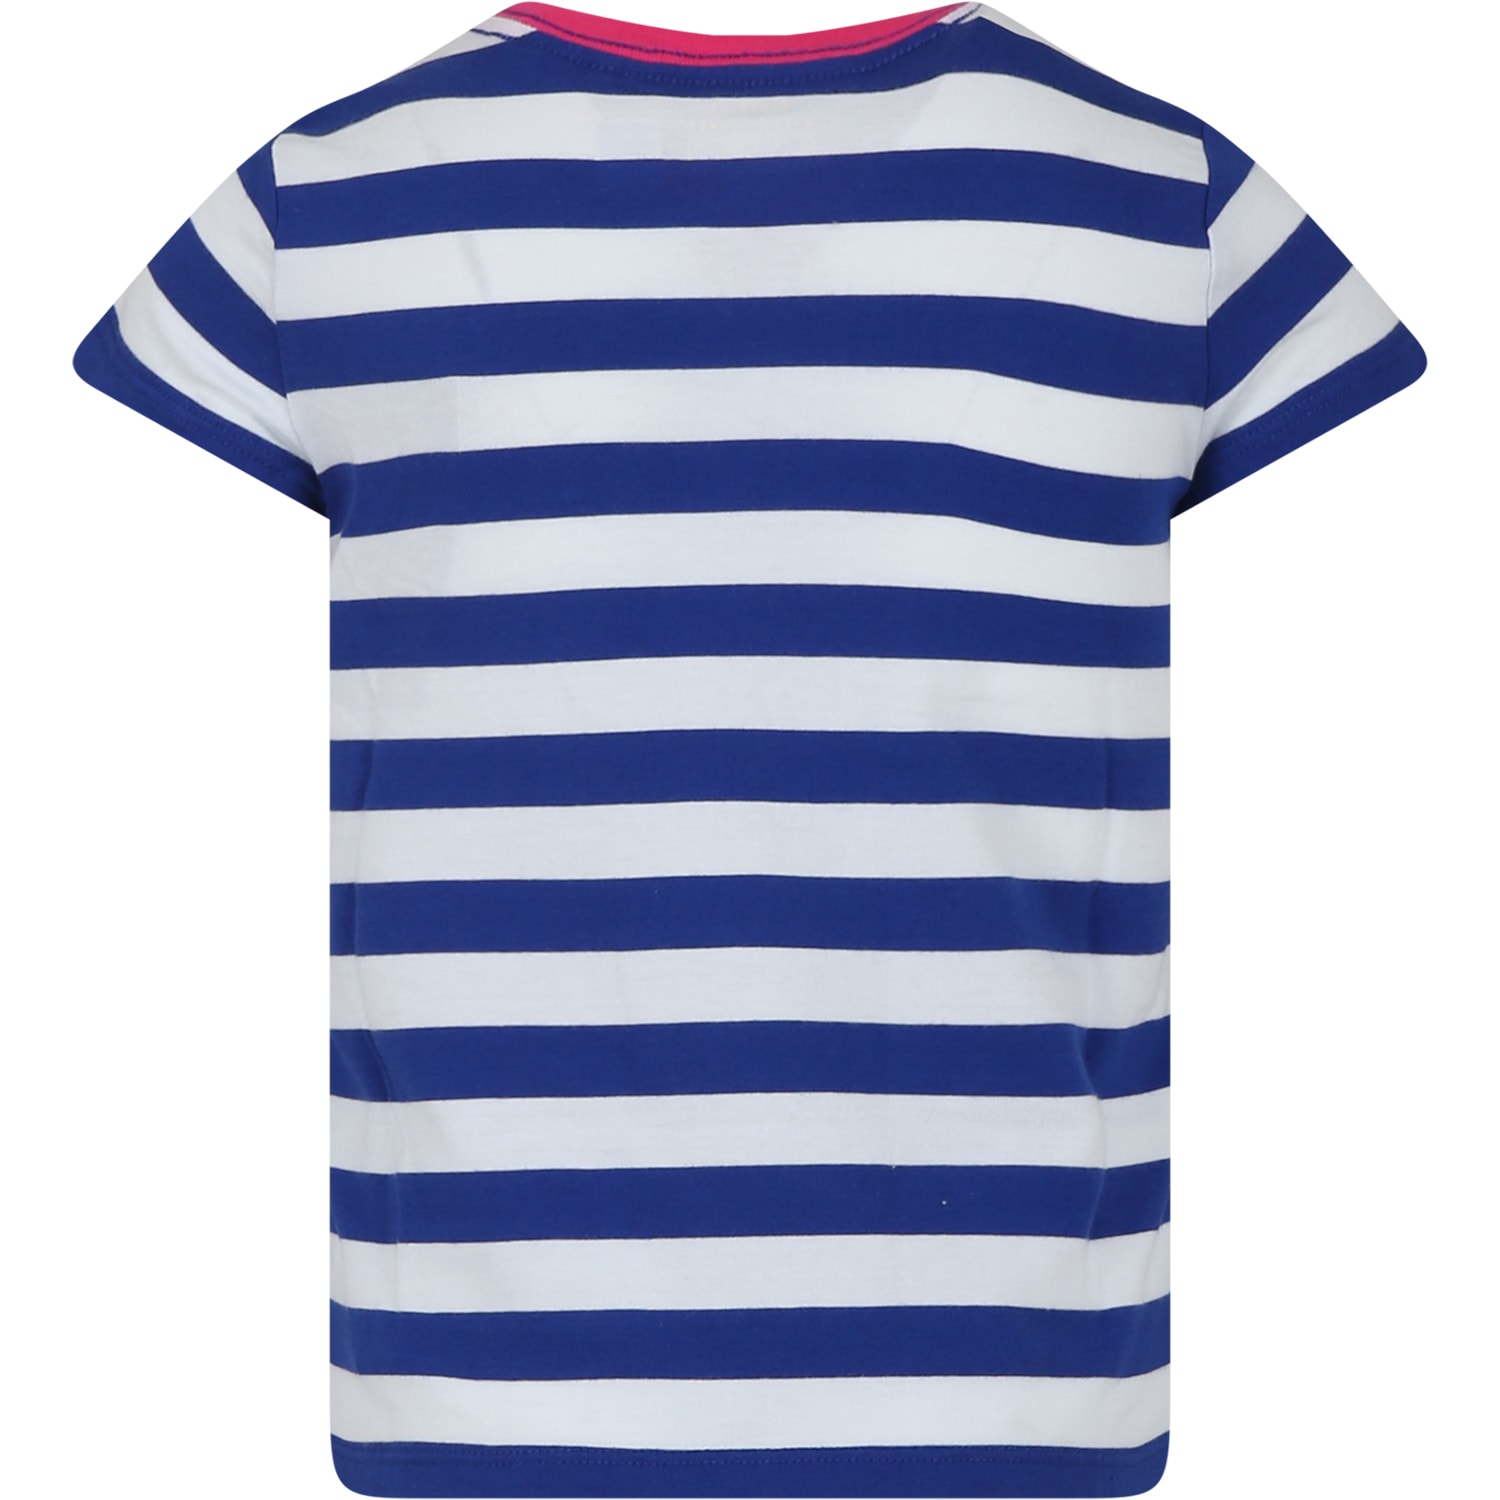 Shop Ralph Lauren Blue T-shirt For Girl With Polo Bear In Multicolor